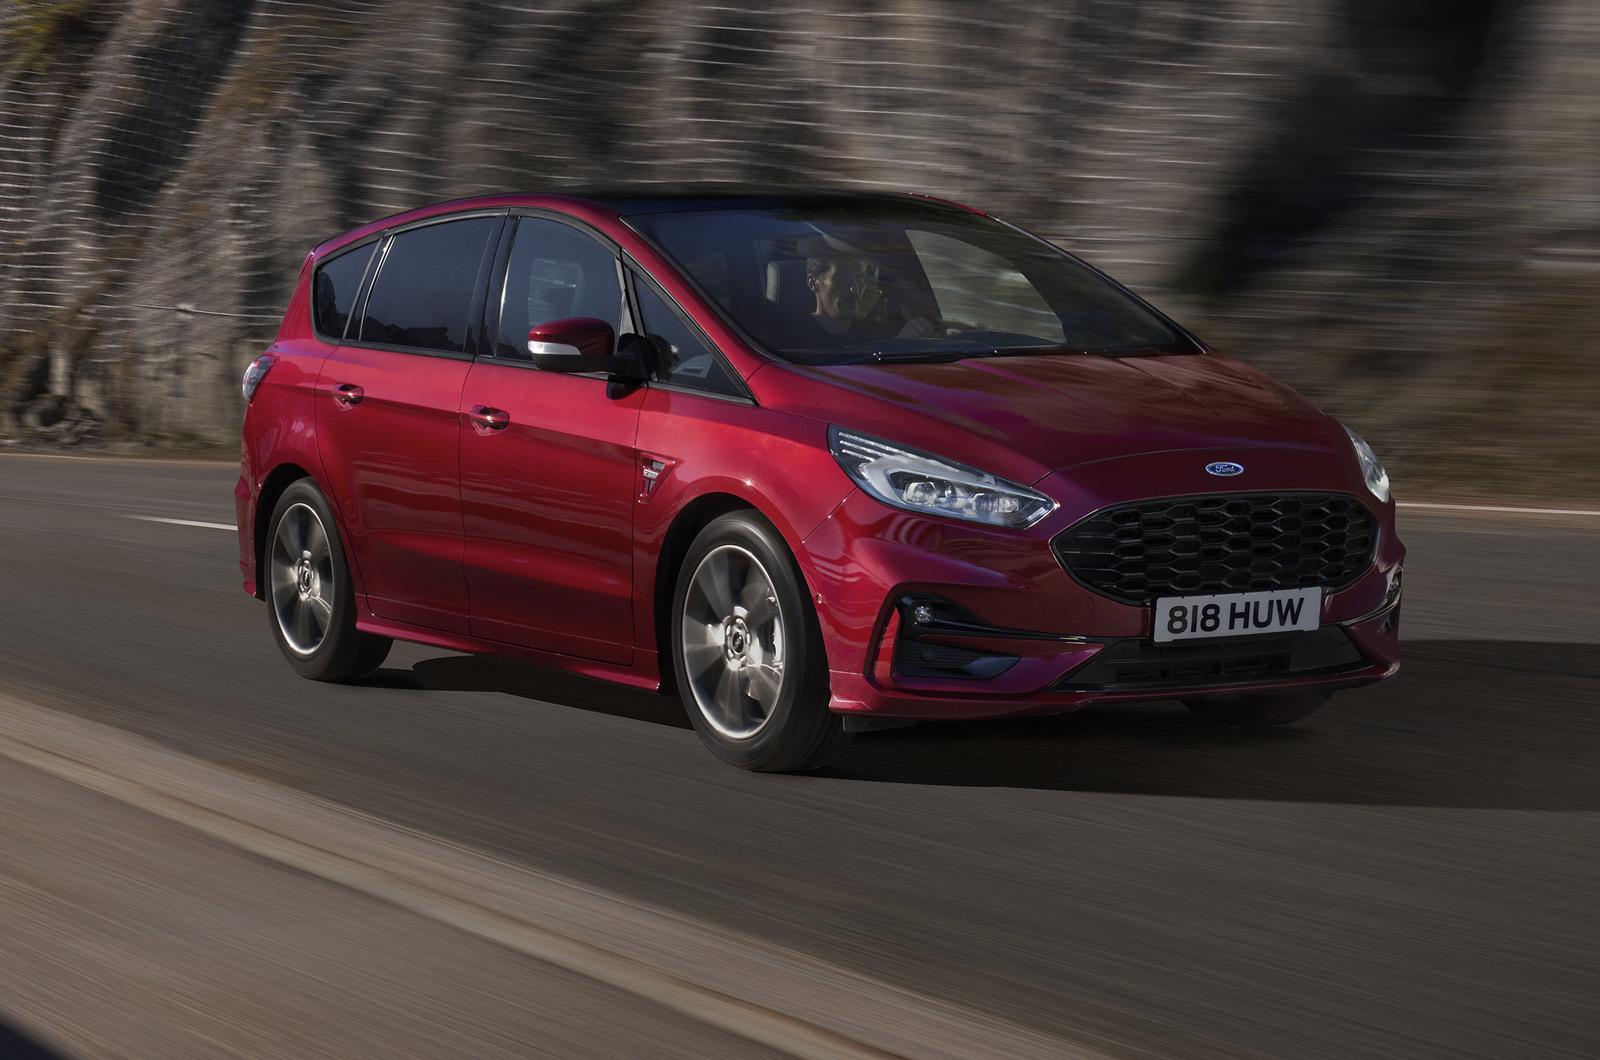 https://www.autocar.co.uk/sites/autocar.co.uk/files/images/car-reviews/first-drives/legacy/2021_ford_s-max_05.jpg